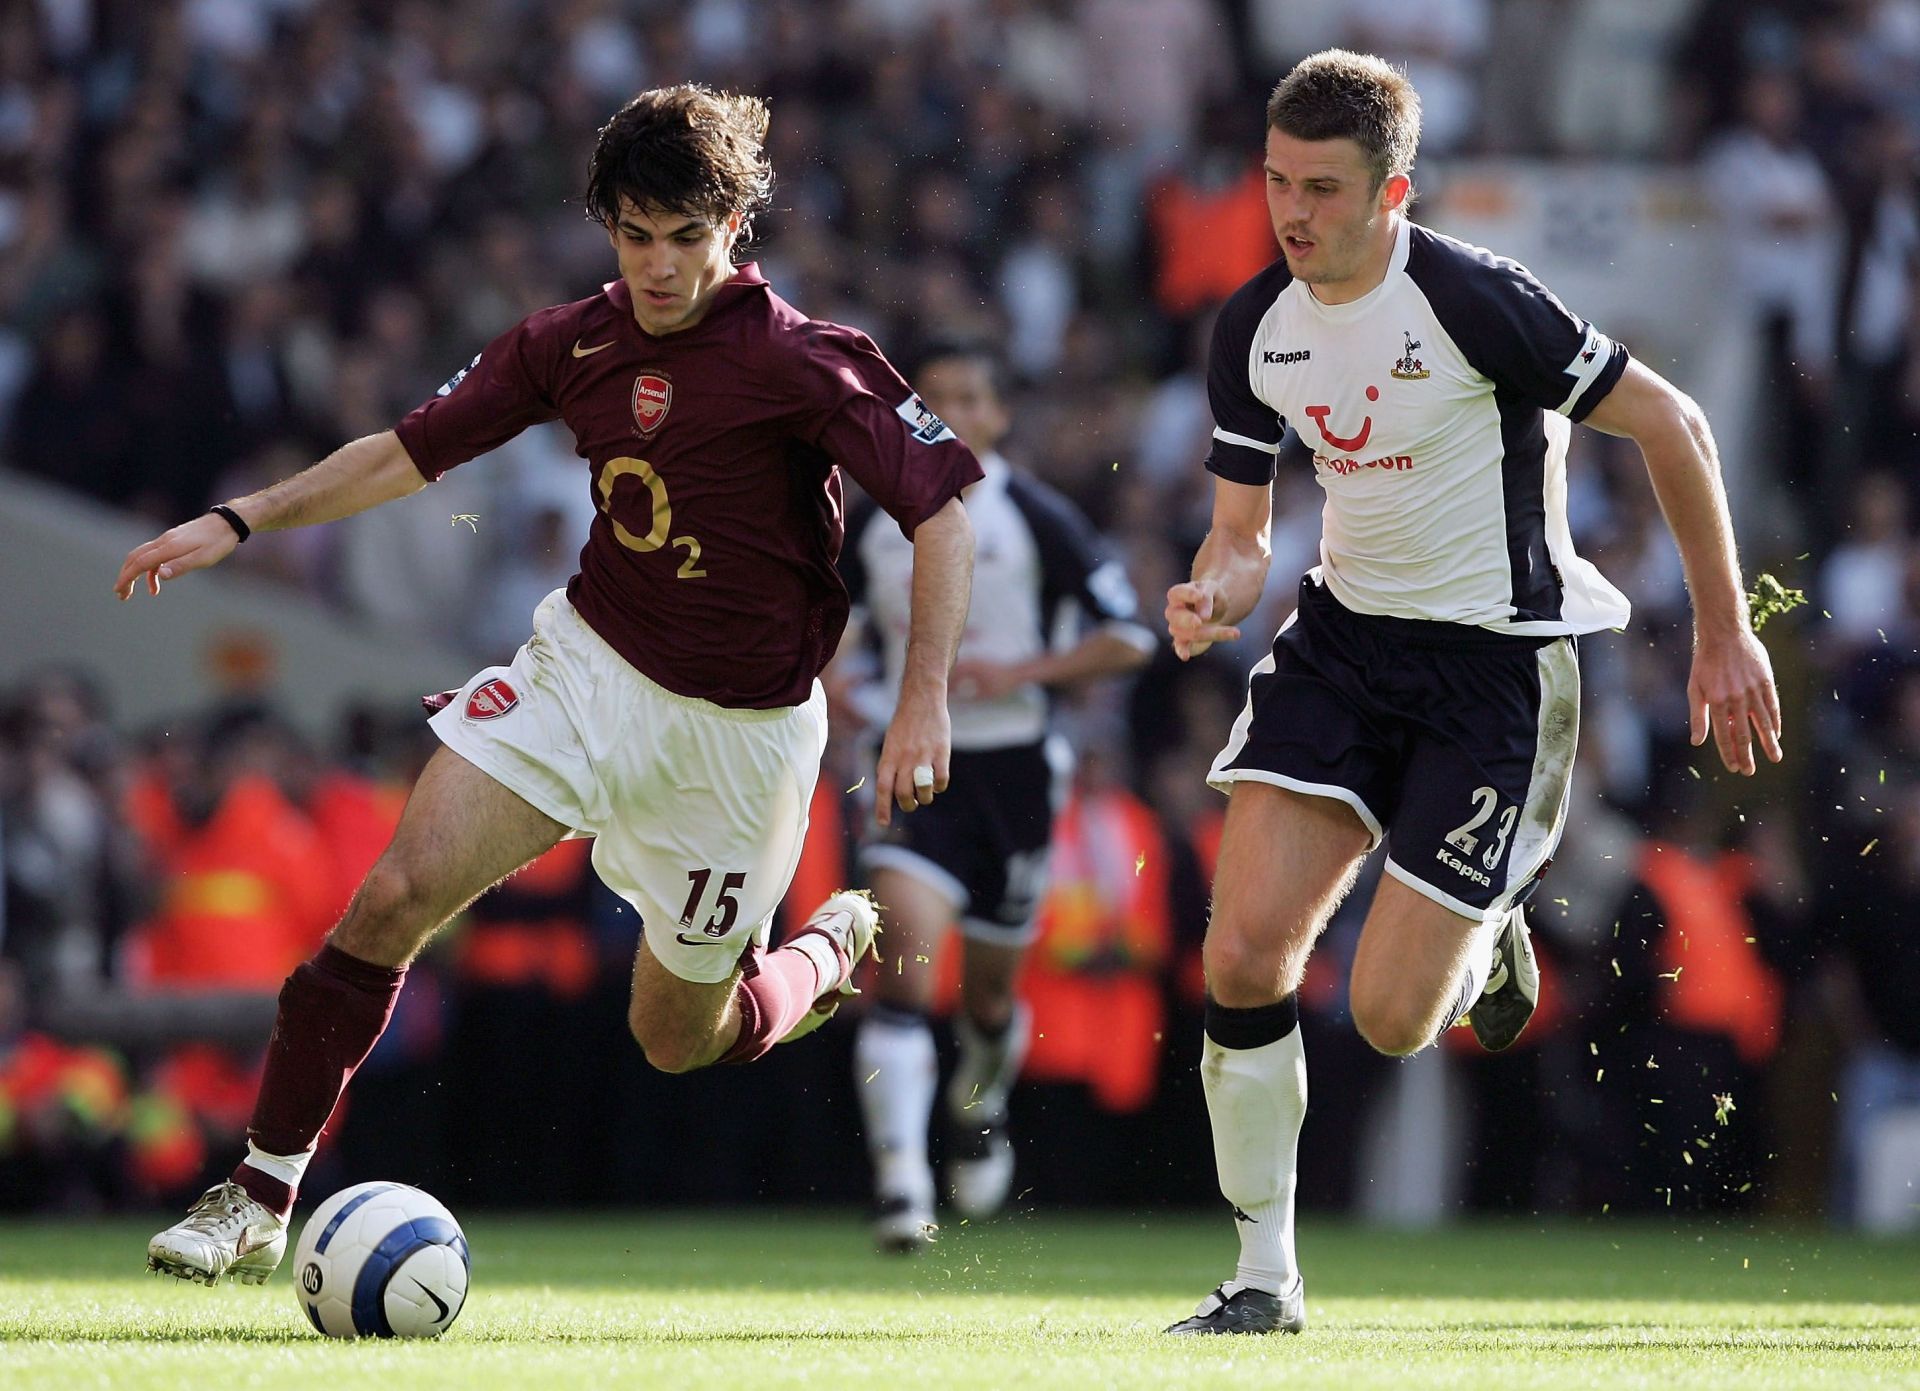 Michael Carrick was once a West Ham United player